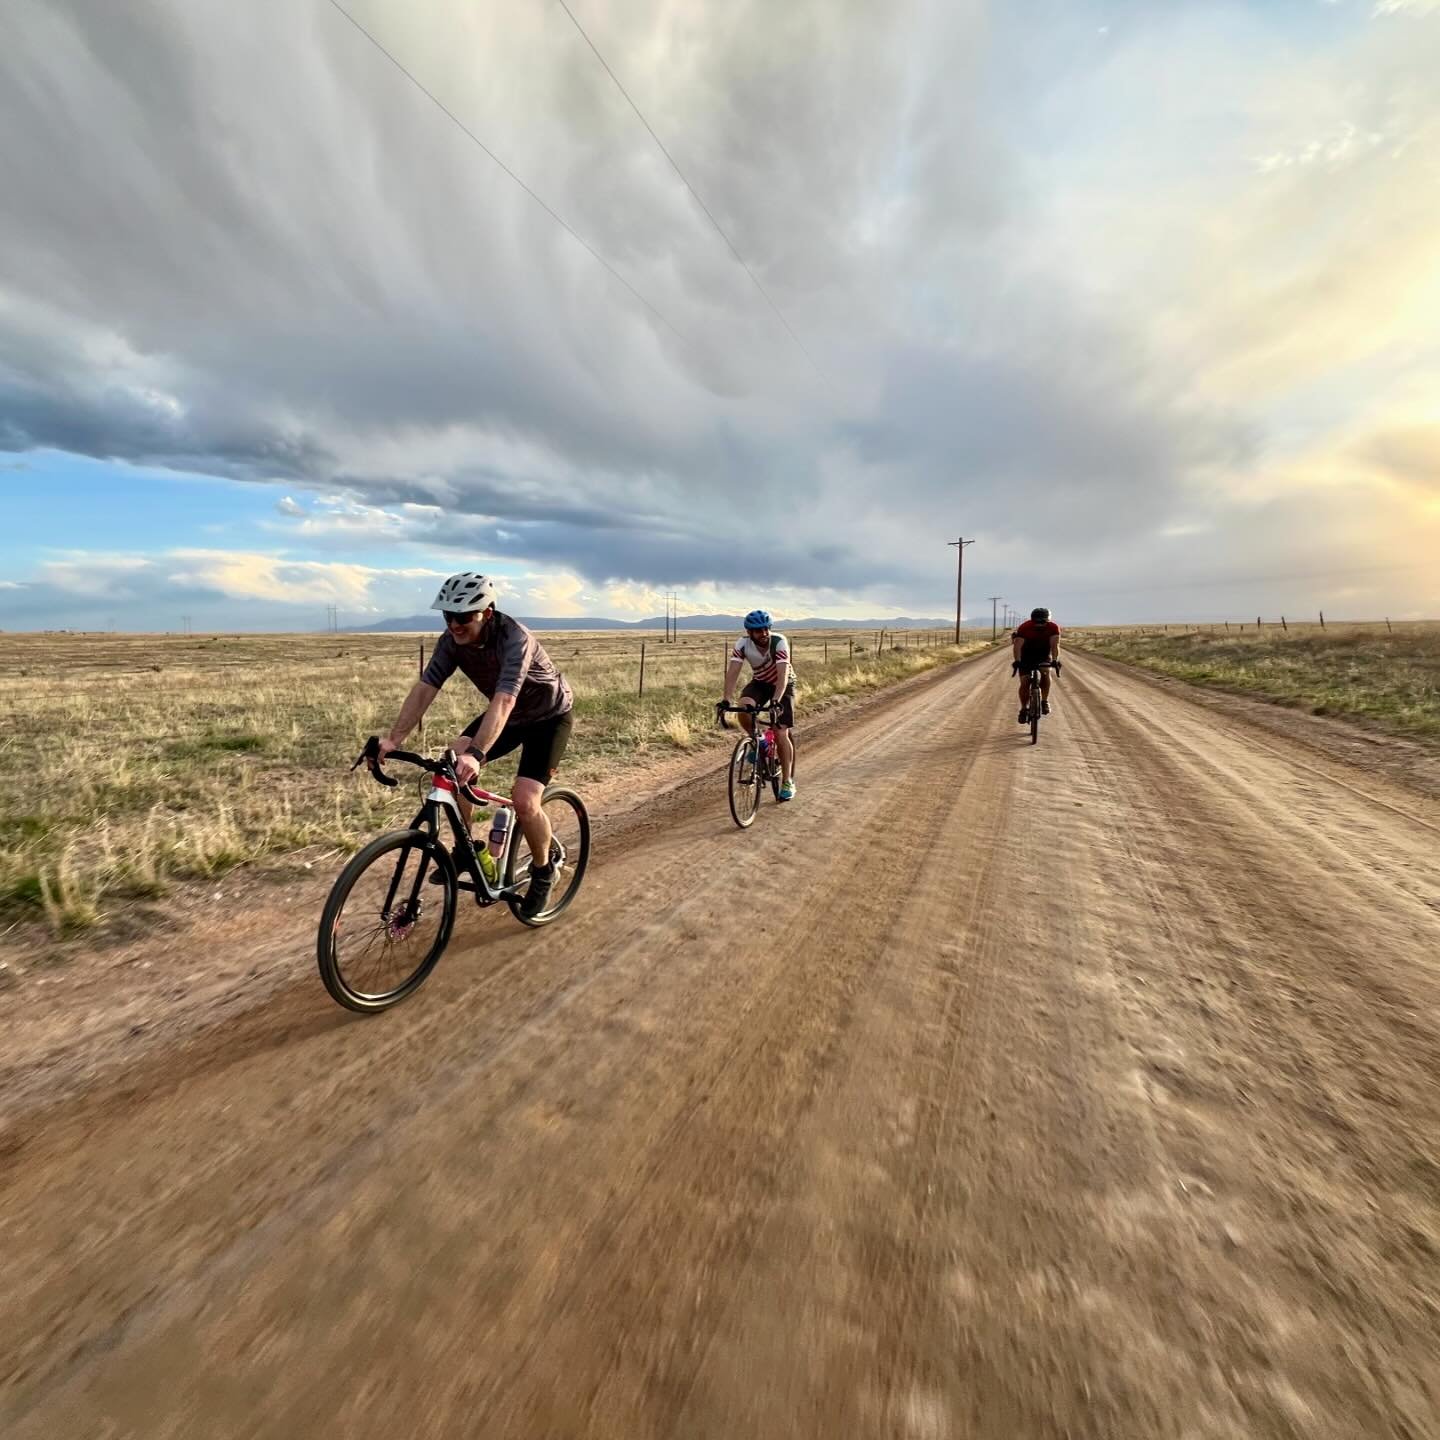 A gravel race for everyone&hellip;and it&rsquo;s coming October 12th. You should probably get signed up. We&rsquo;ve got four distances. And full support on all of &lsquo;em. And some of the best timing in the biz. And delicious food. And a killer af